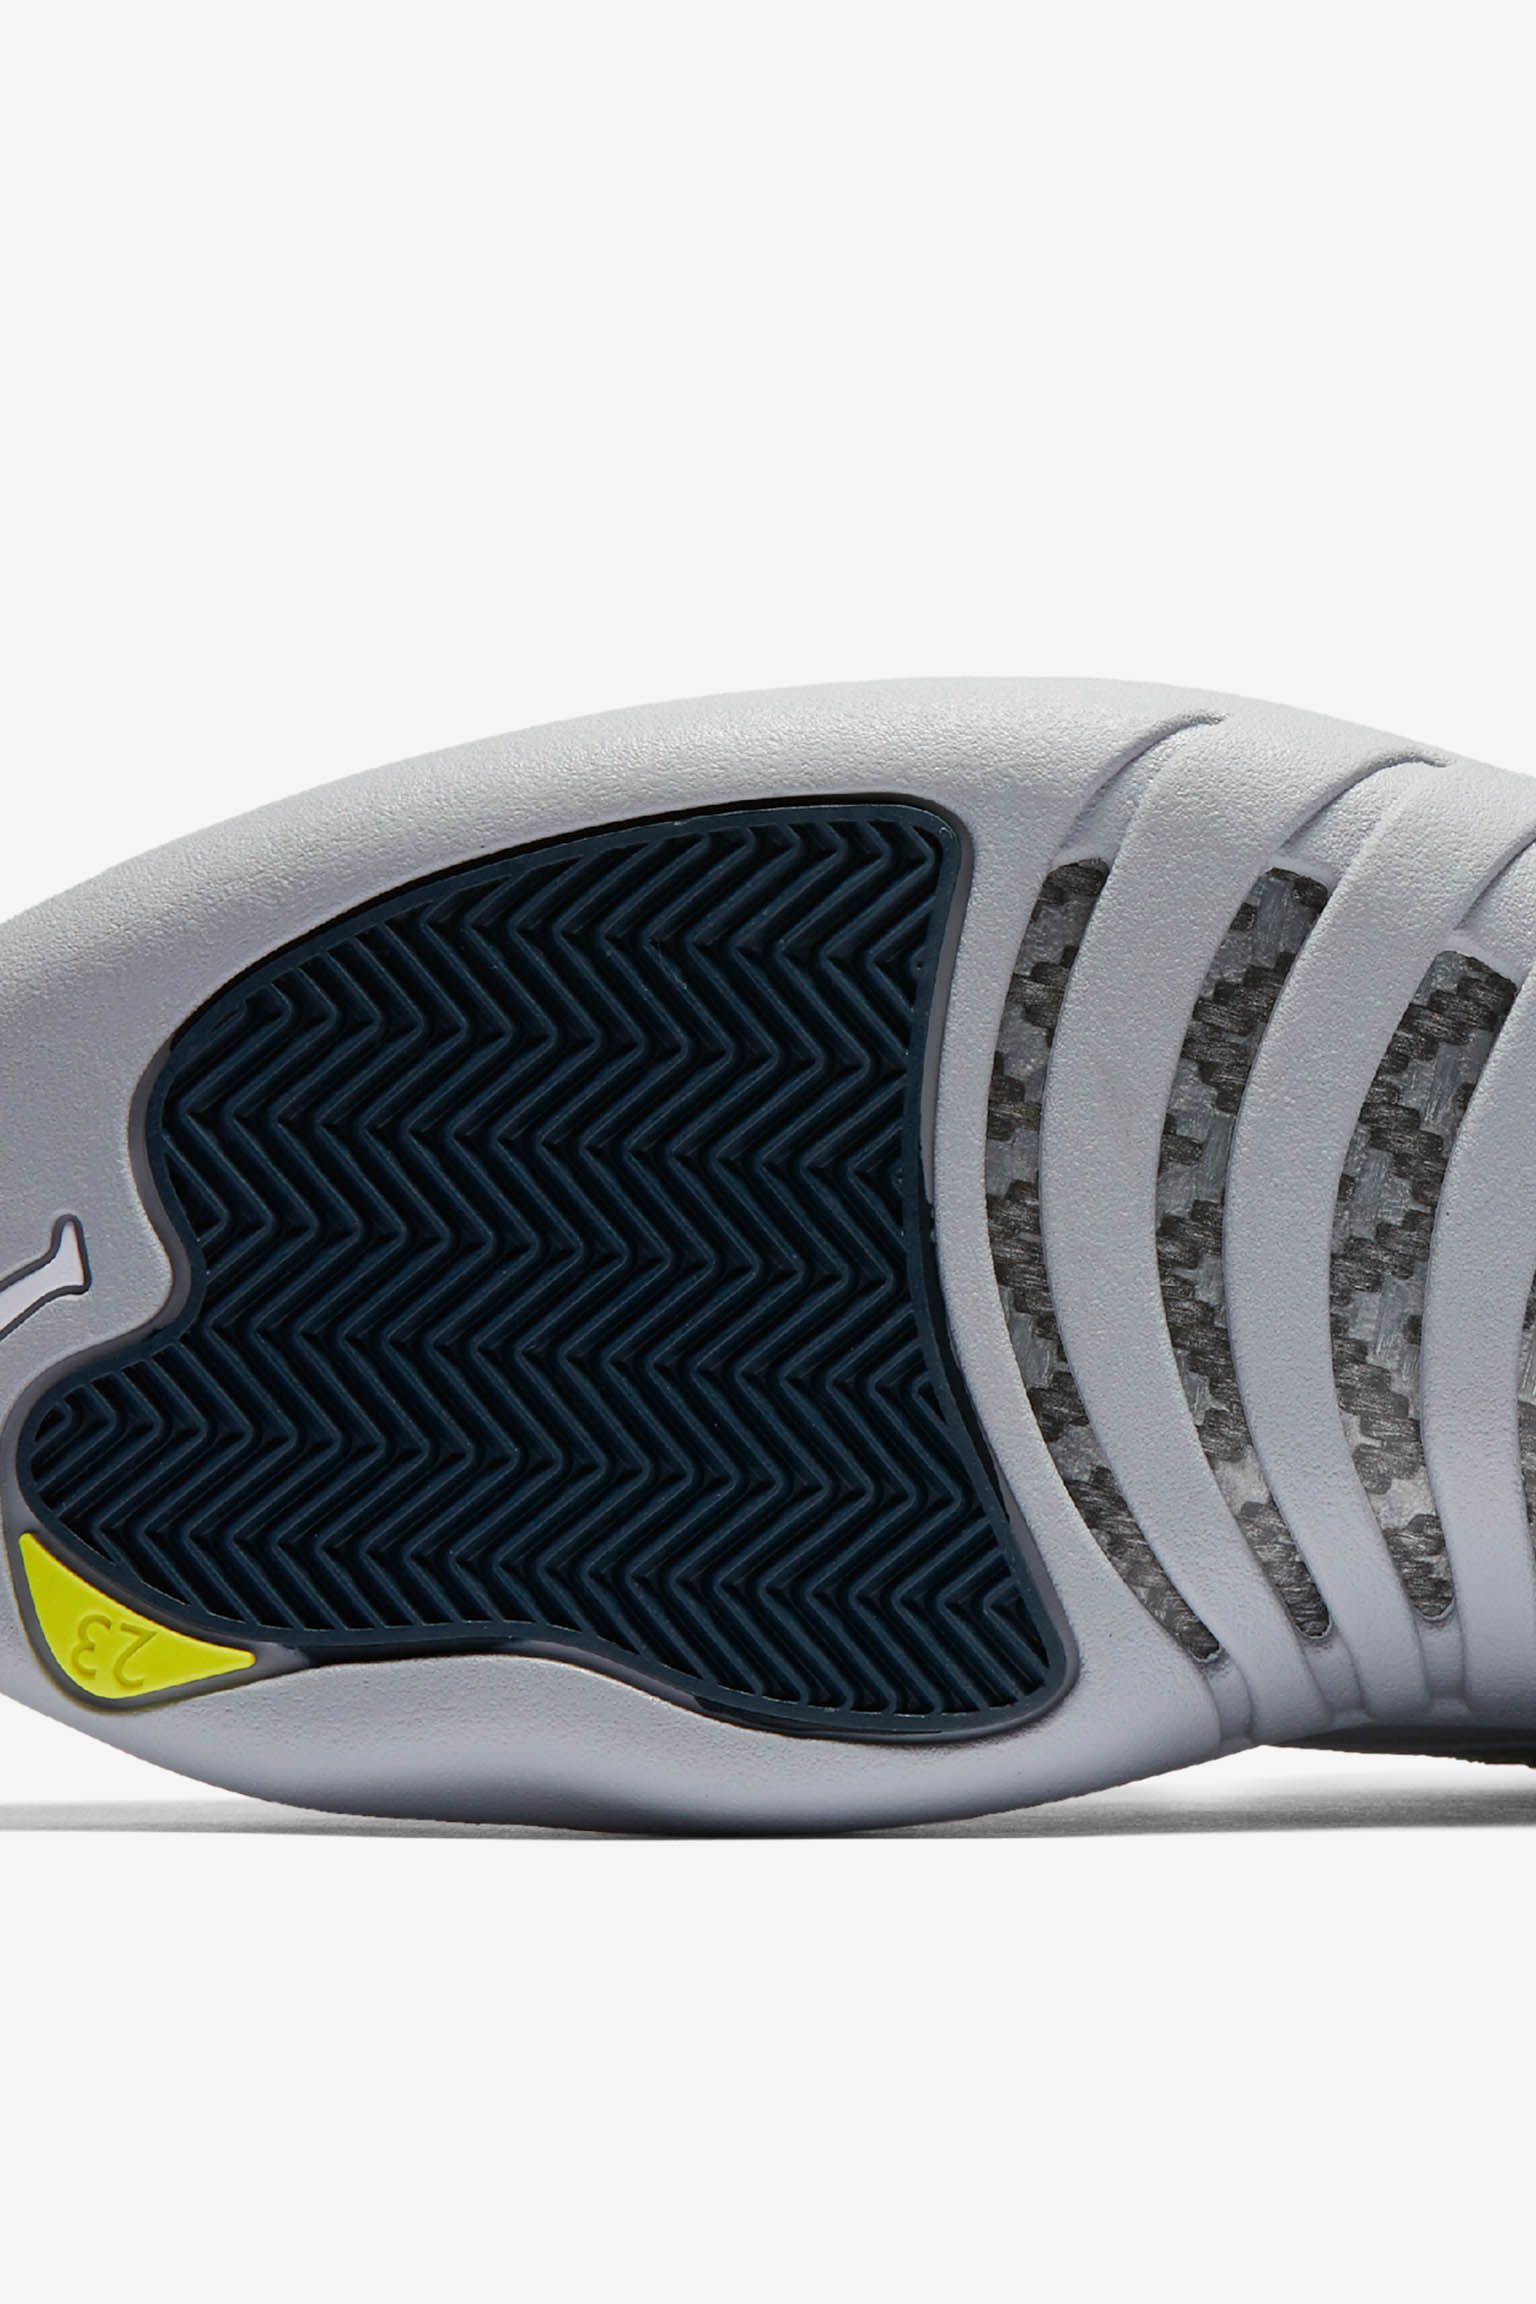 Now Available: Air Jordan 12 Retro Low Wolf Grey — Sneaker Shouts